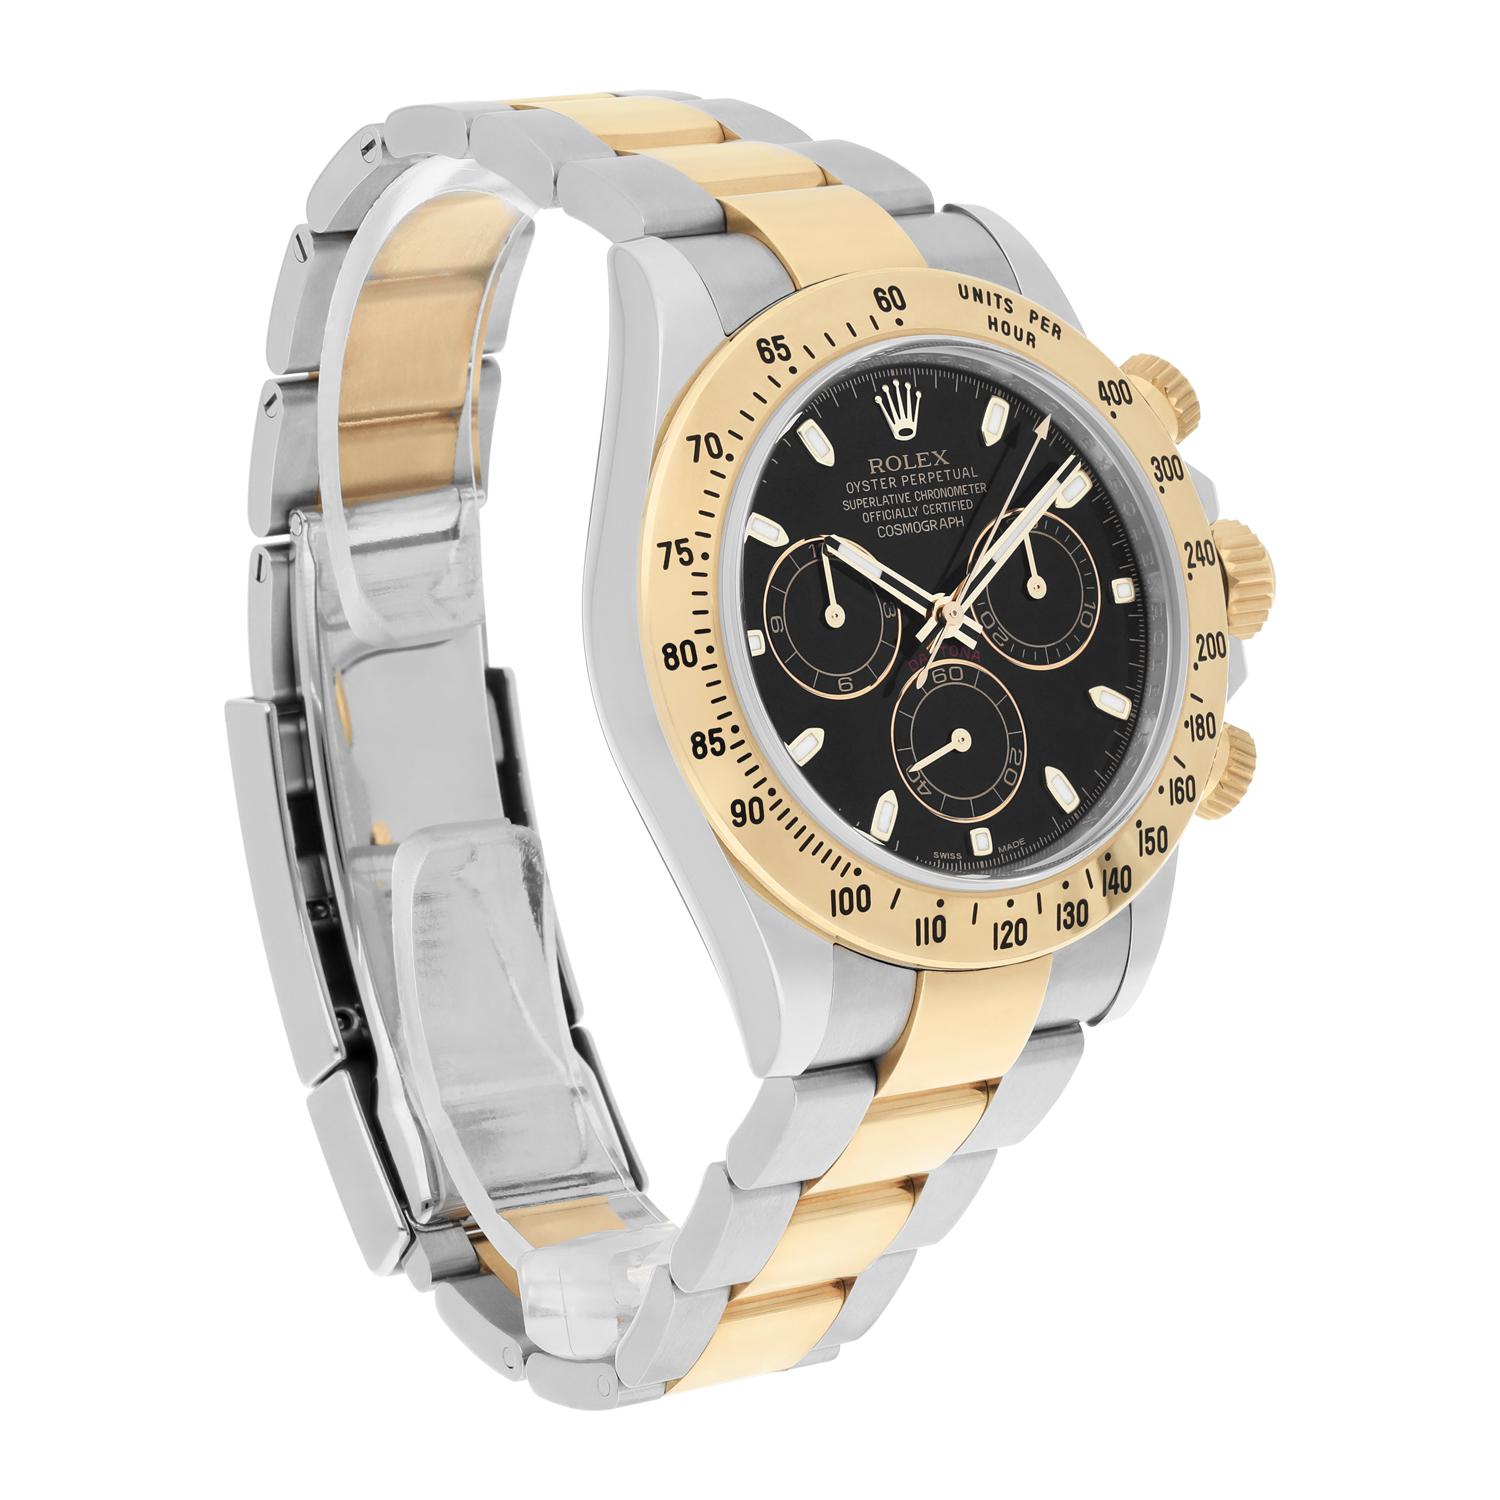 Rolex Daytona Stainless Steel Yellow Gold Black Dial Mens Watch 116523 For Sale 1